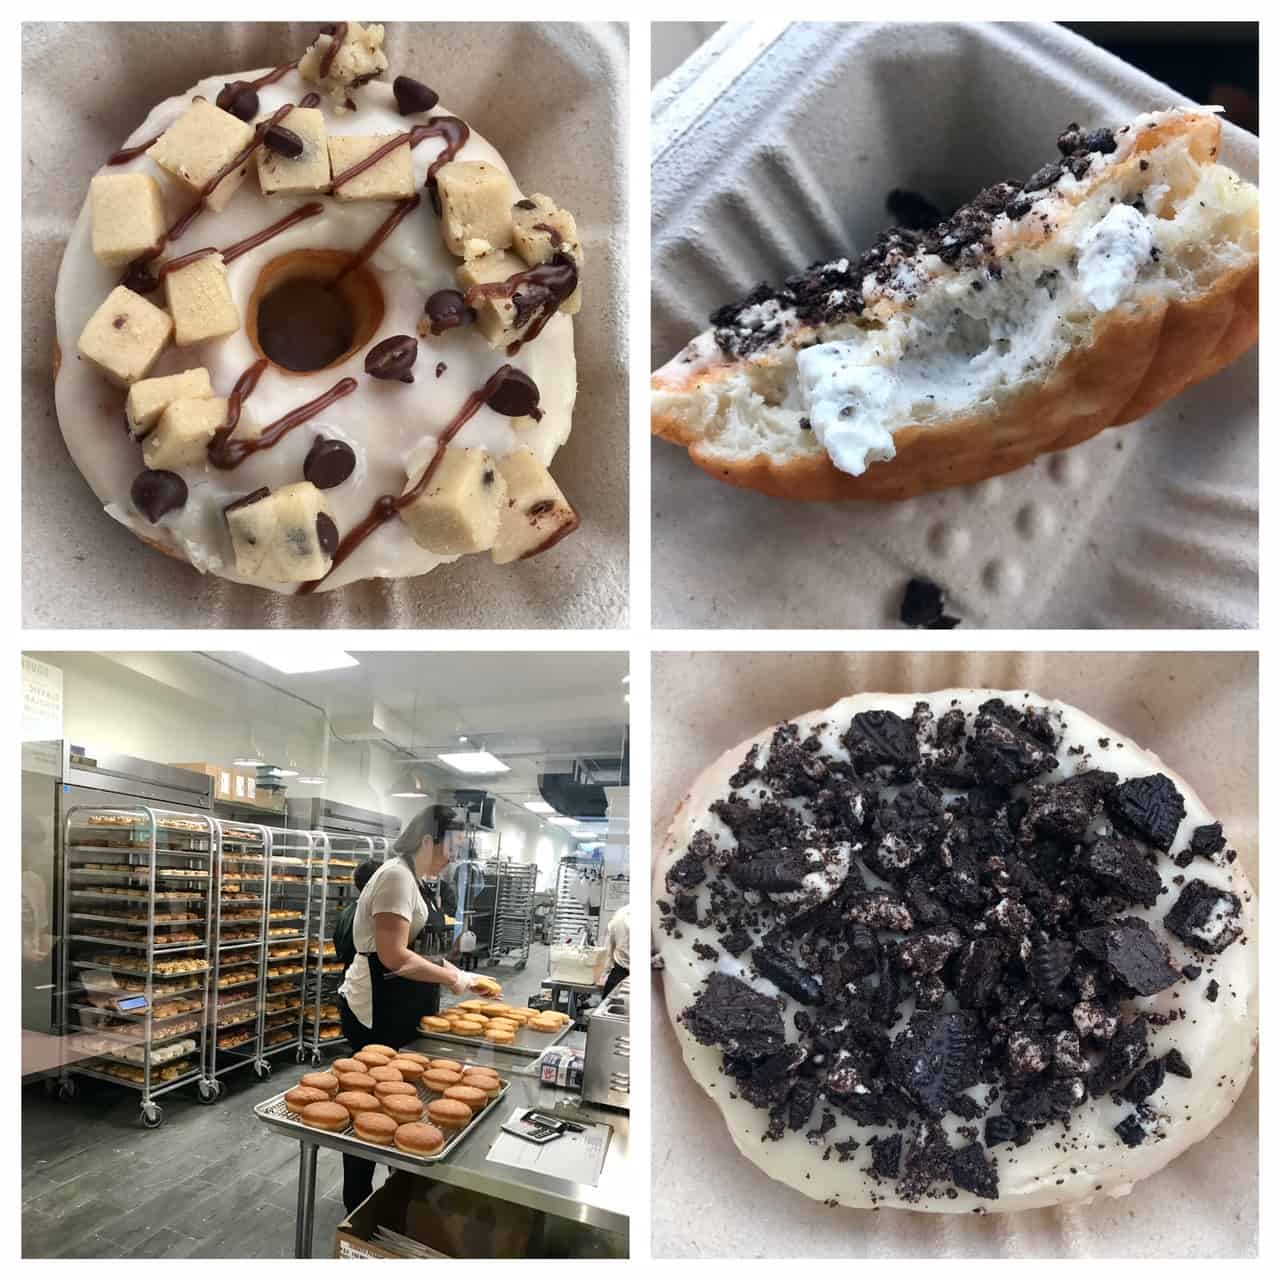 Collage of images of doughnuts from Beechwood Doughnuts